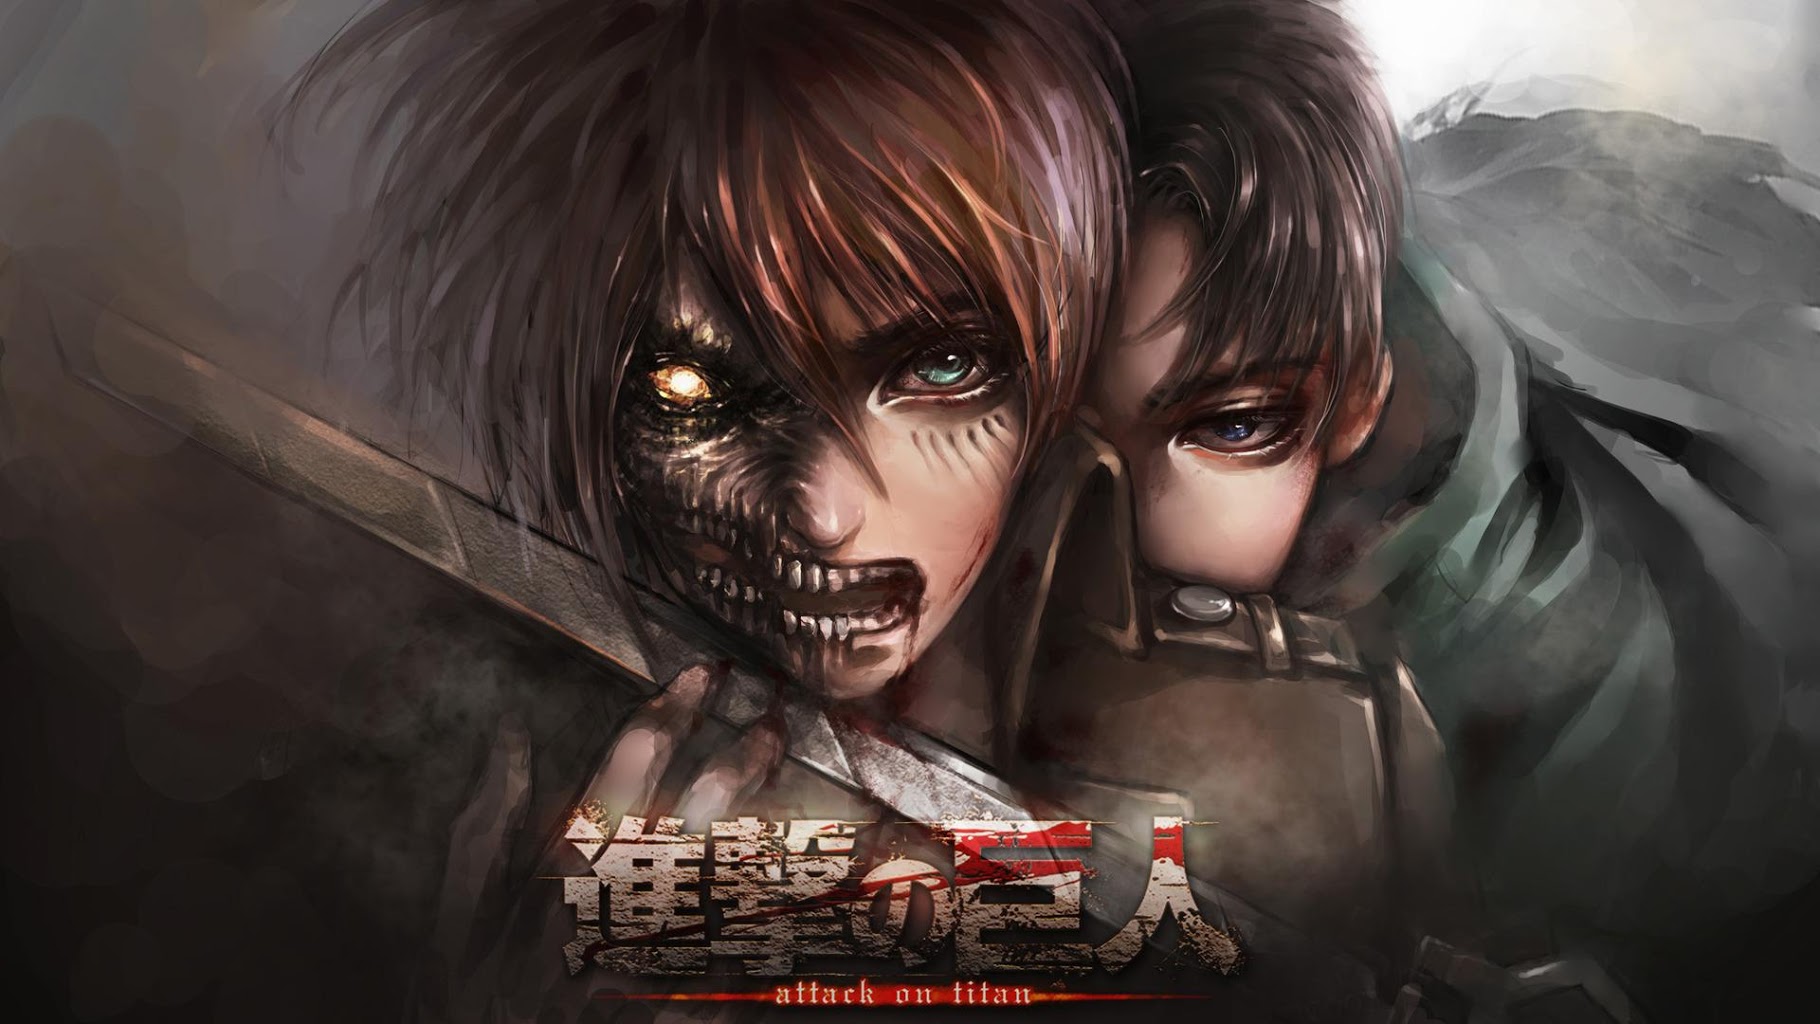 Attack on Titan HD Wallpaper for android Attack on Titan HD Wallpaper 1820x1024